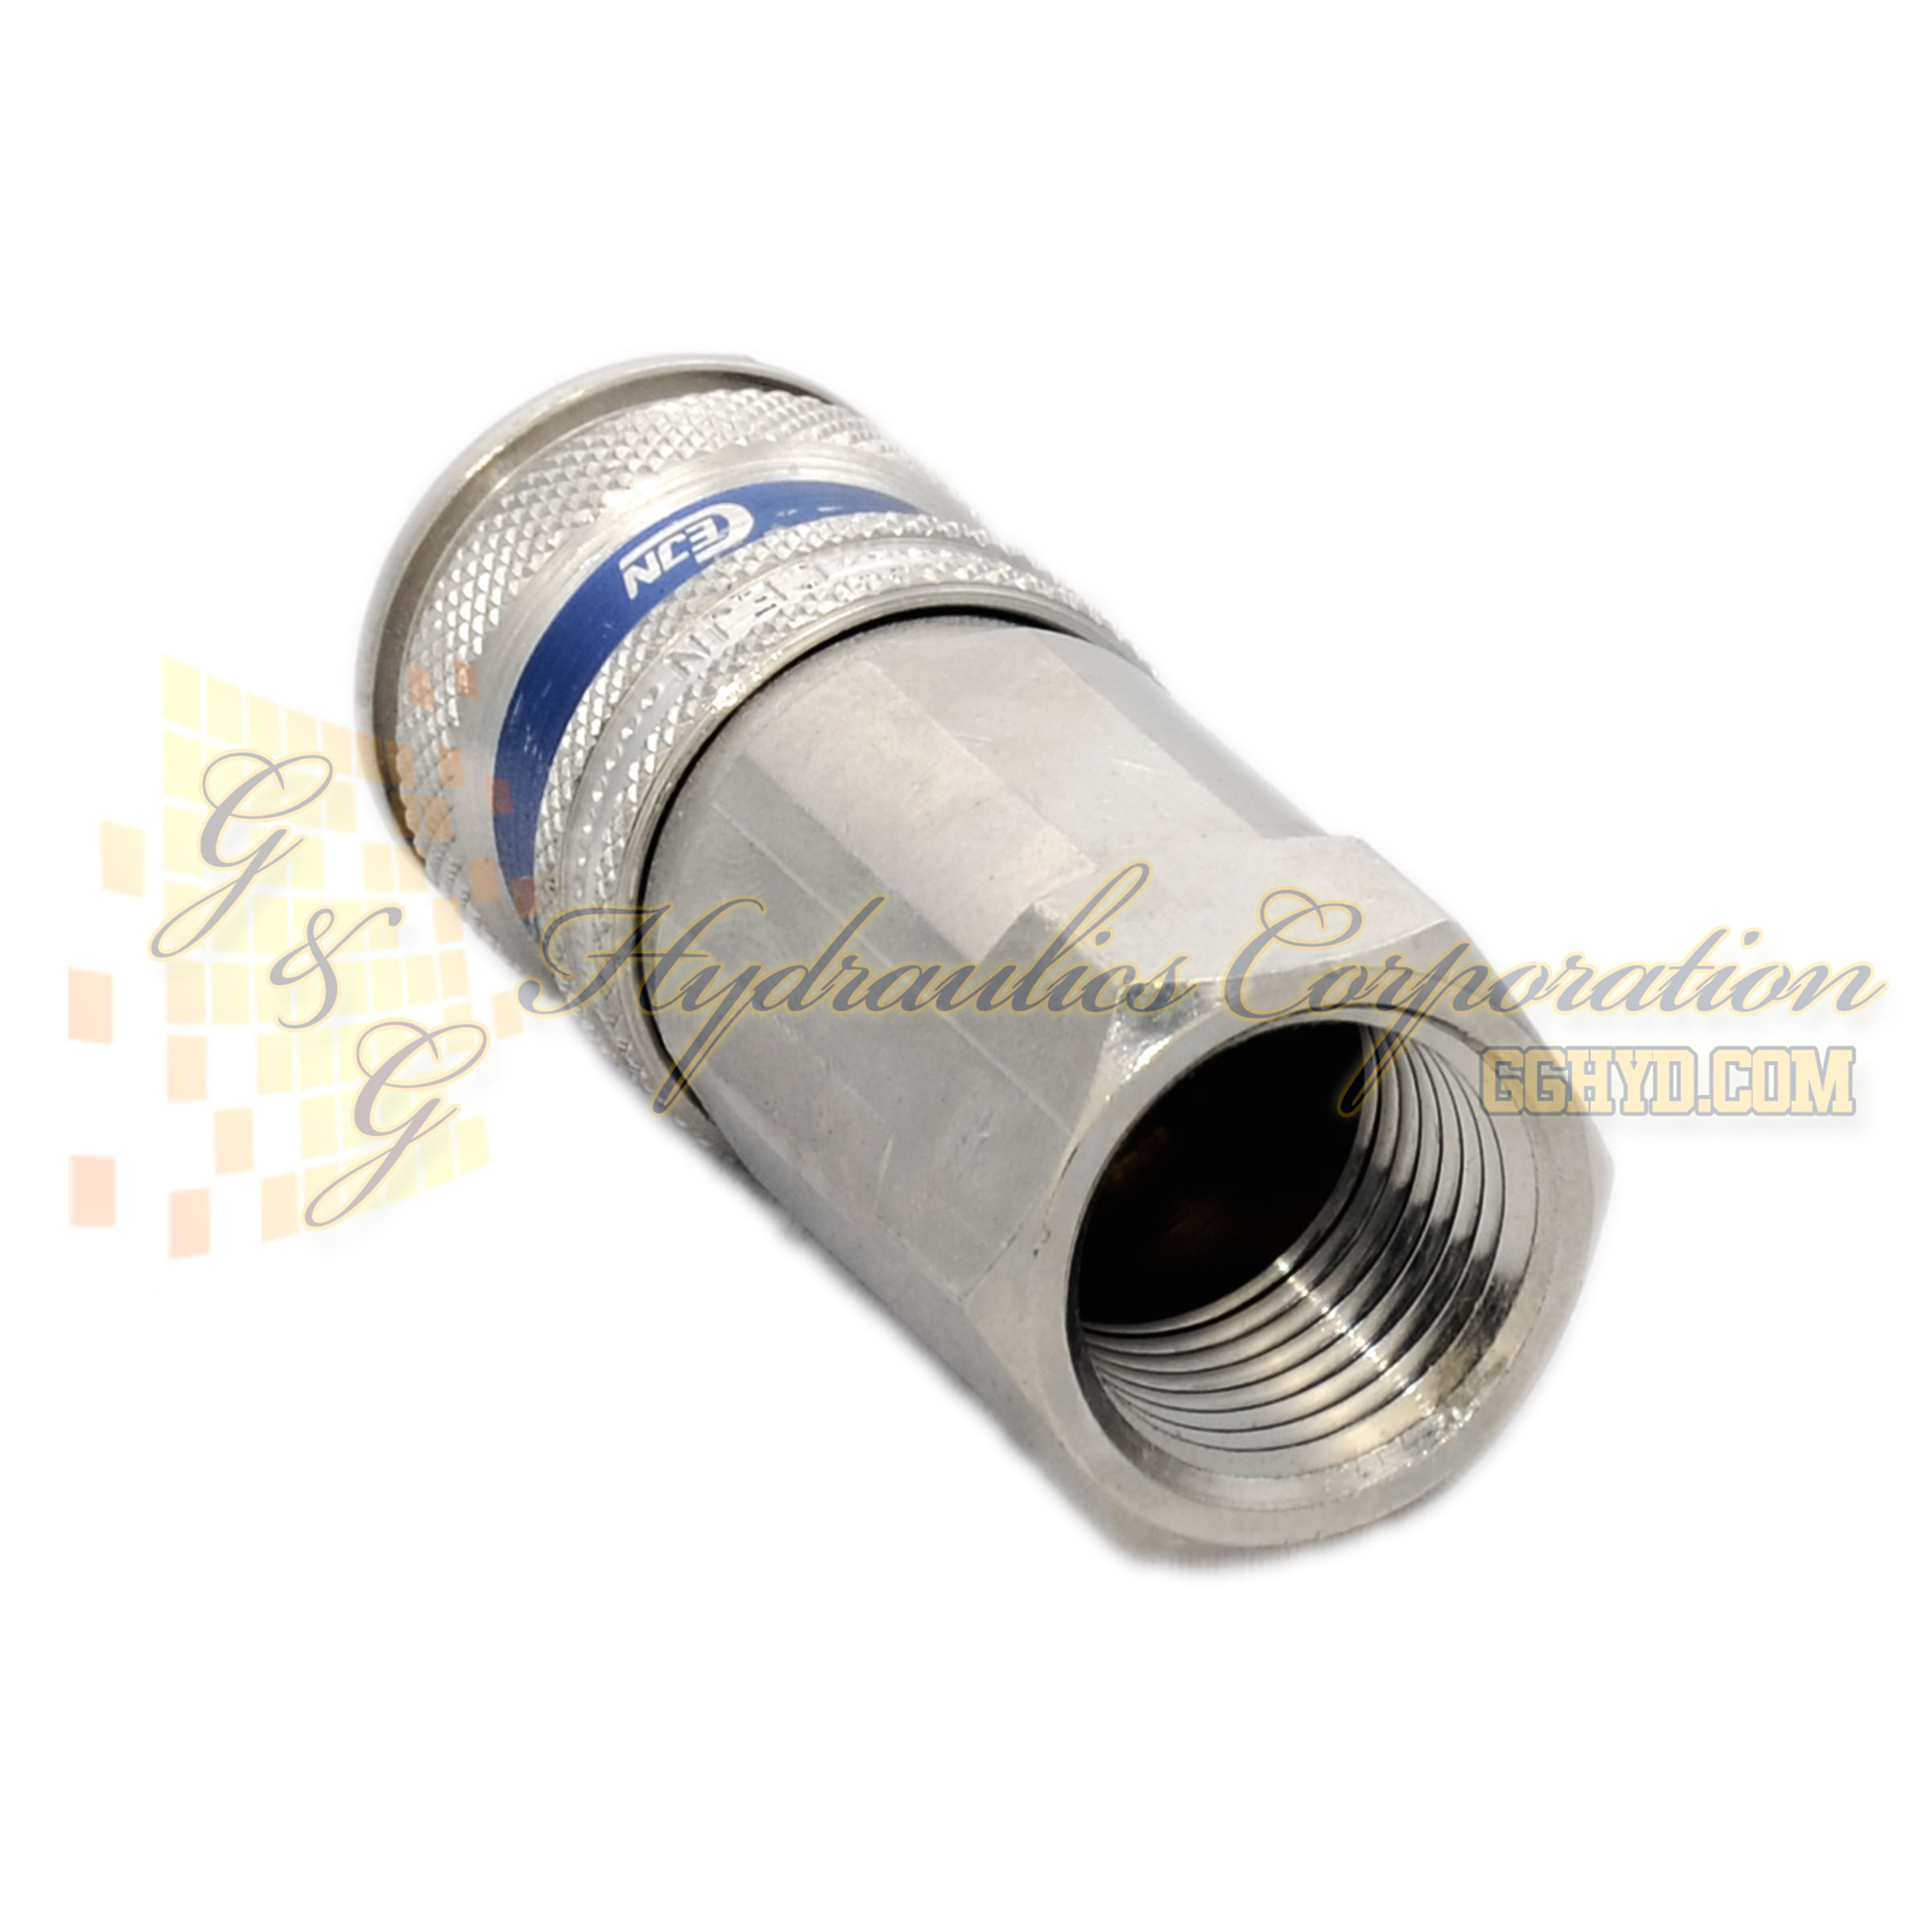 10-320-1405 CEJN Standard and Vented Safety Coupler, 1/2" NPT Female Threads